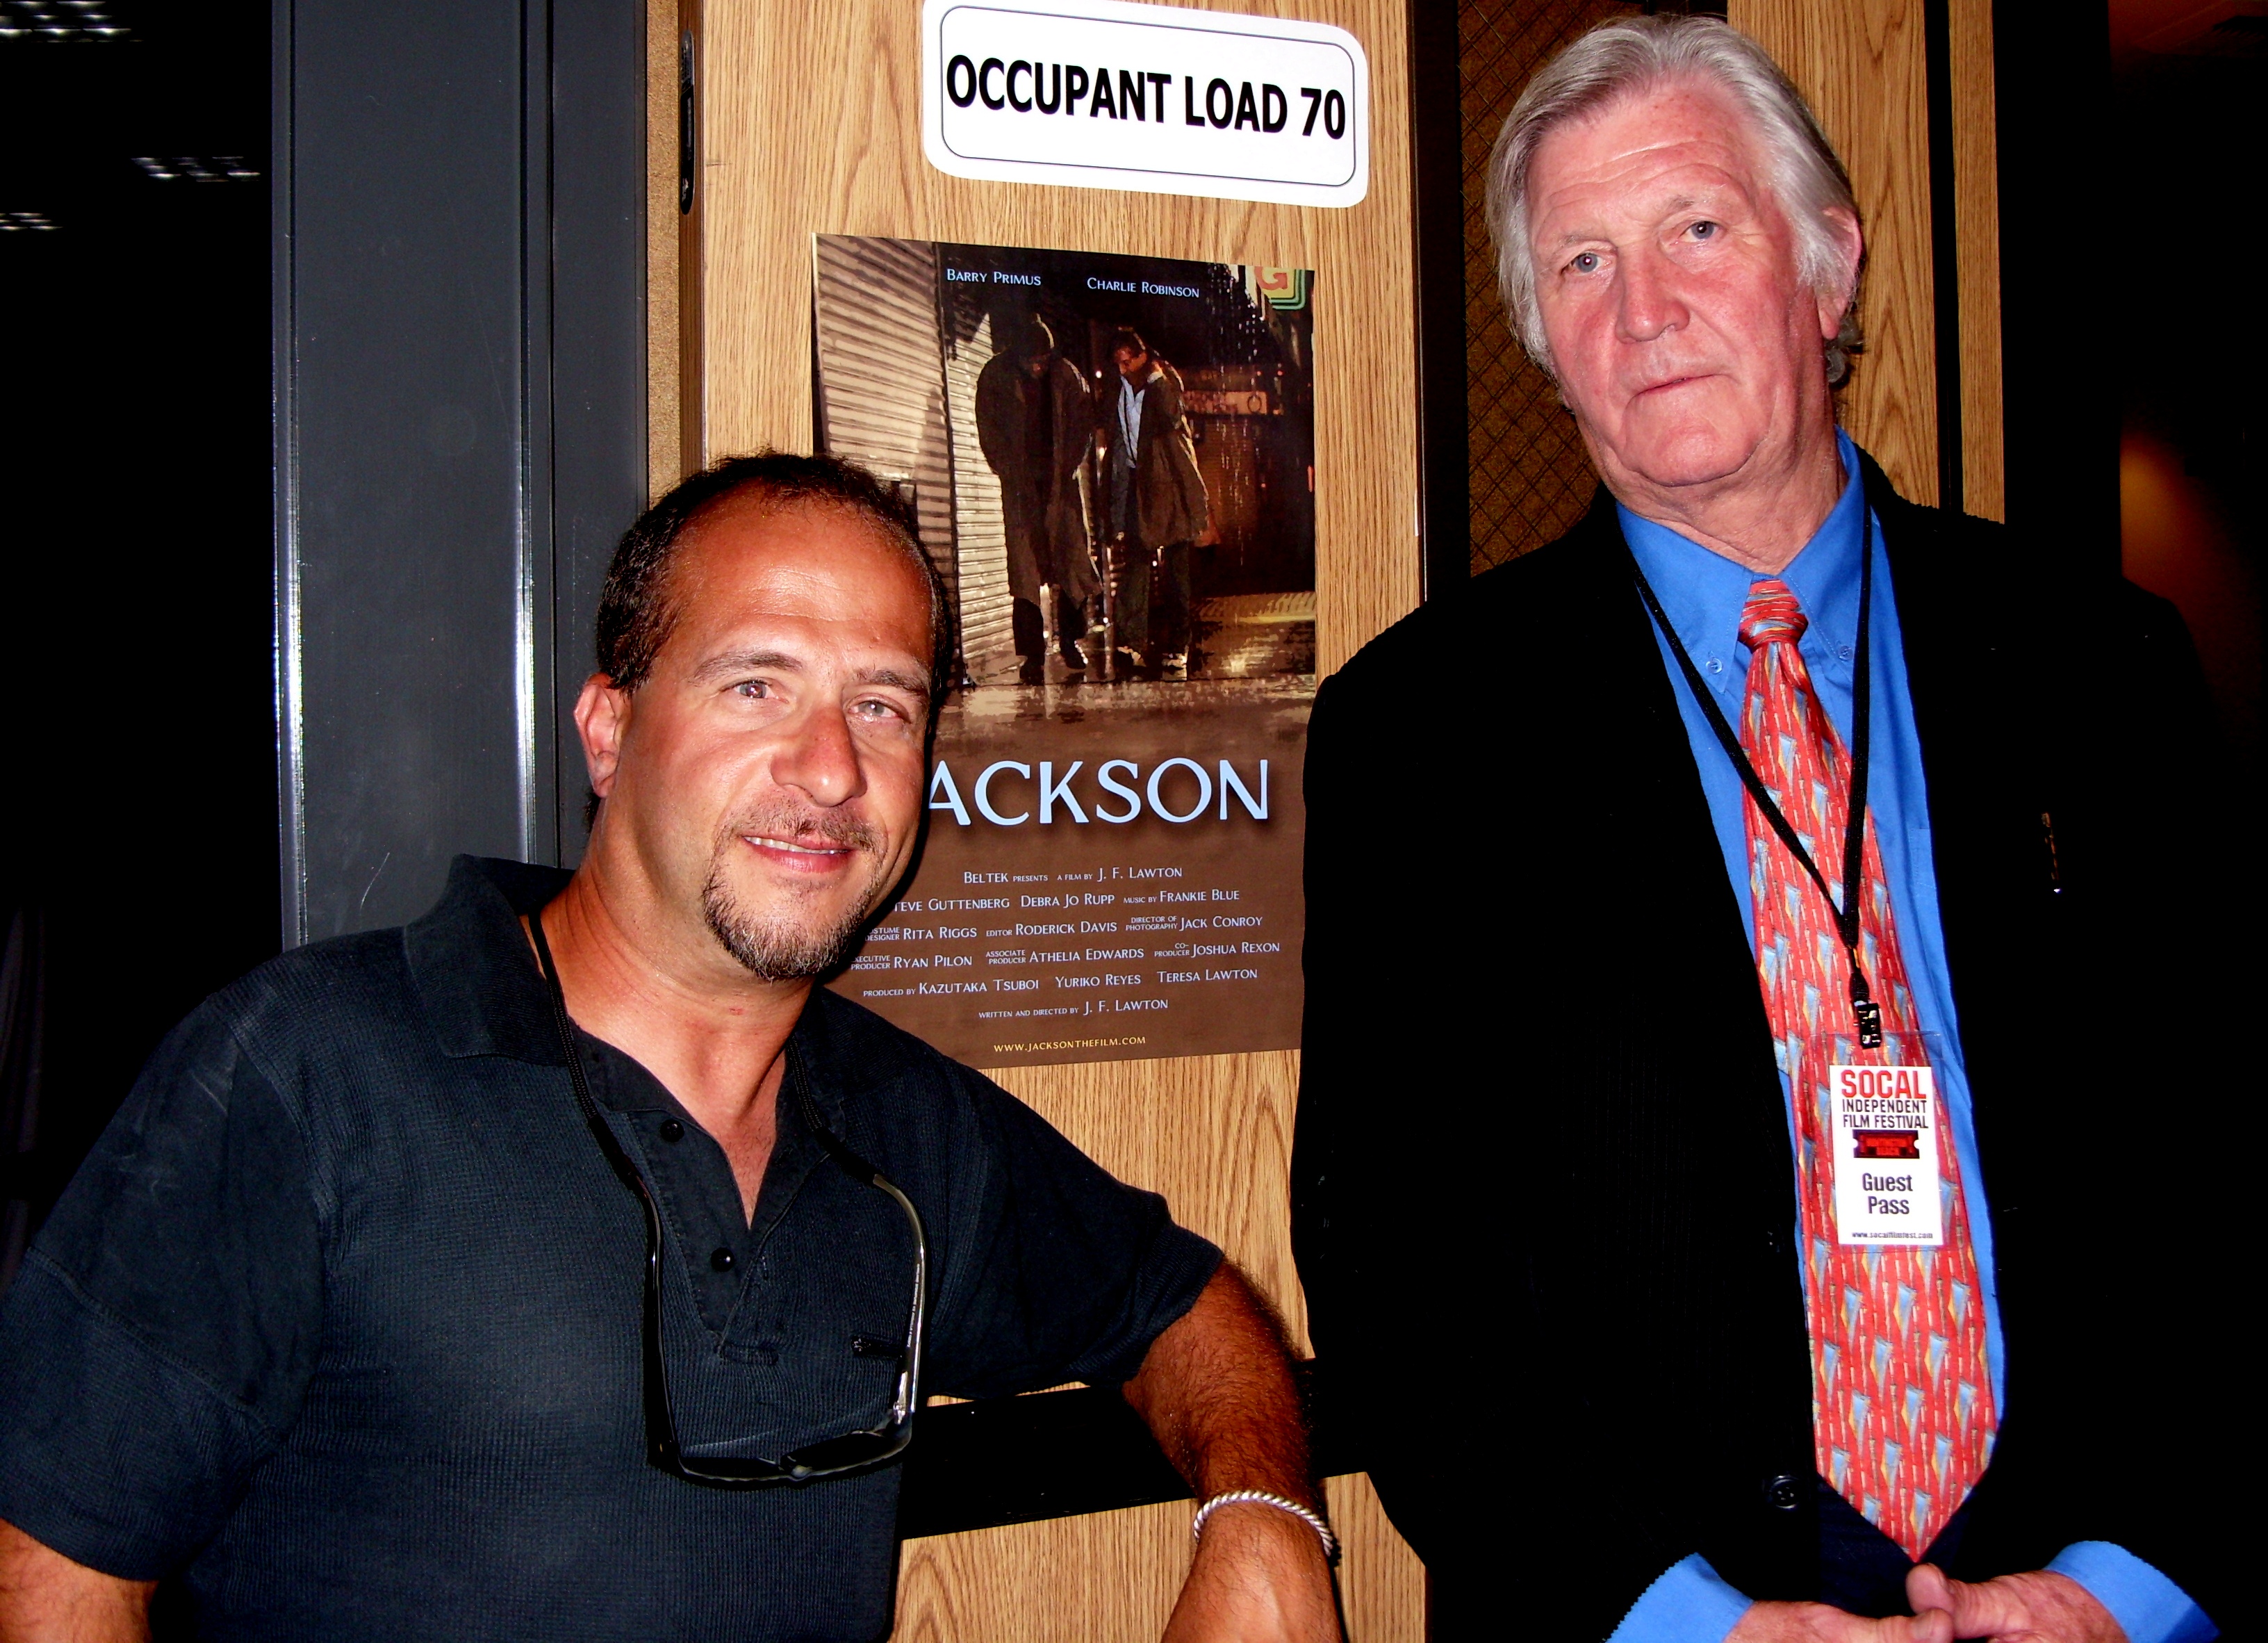 Tony Milazzo & Irish Director/Cinematographer Jack Conroy at the So.Cal Film Festival in 2008. Jack directed 